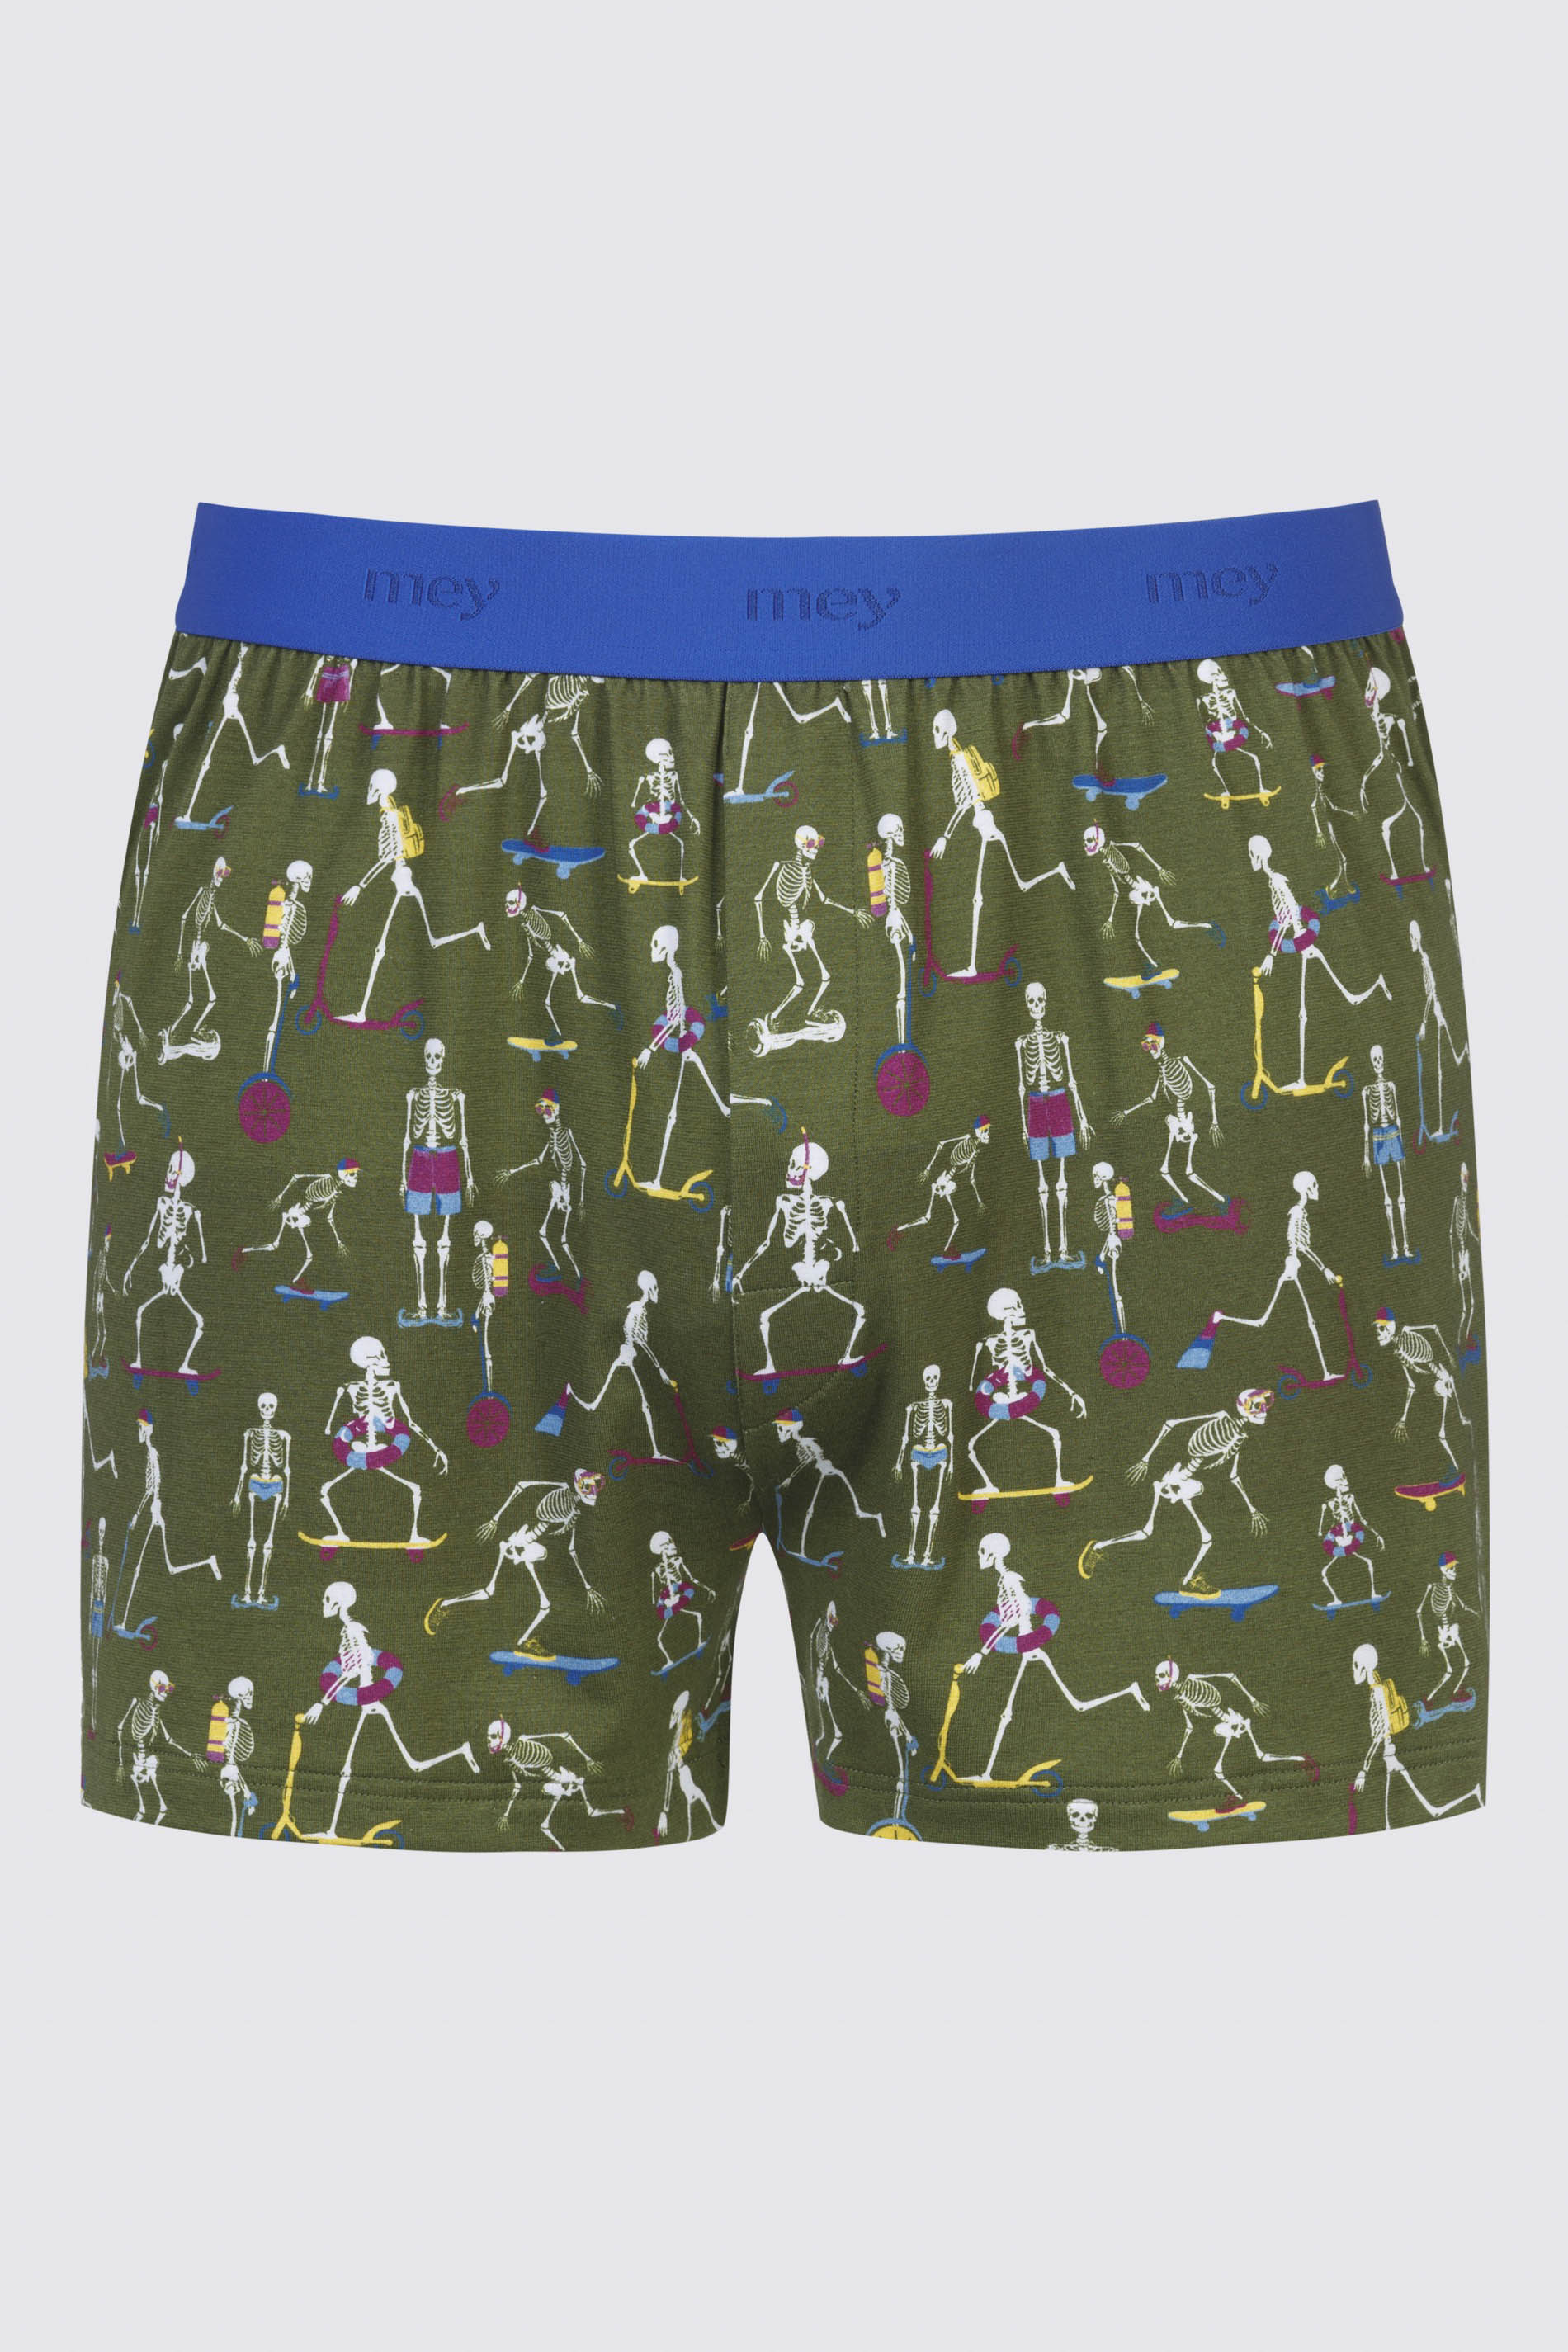 Boxer shorts Serie RE:THINK Skeleton Cut Out | mey®